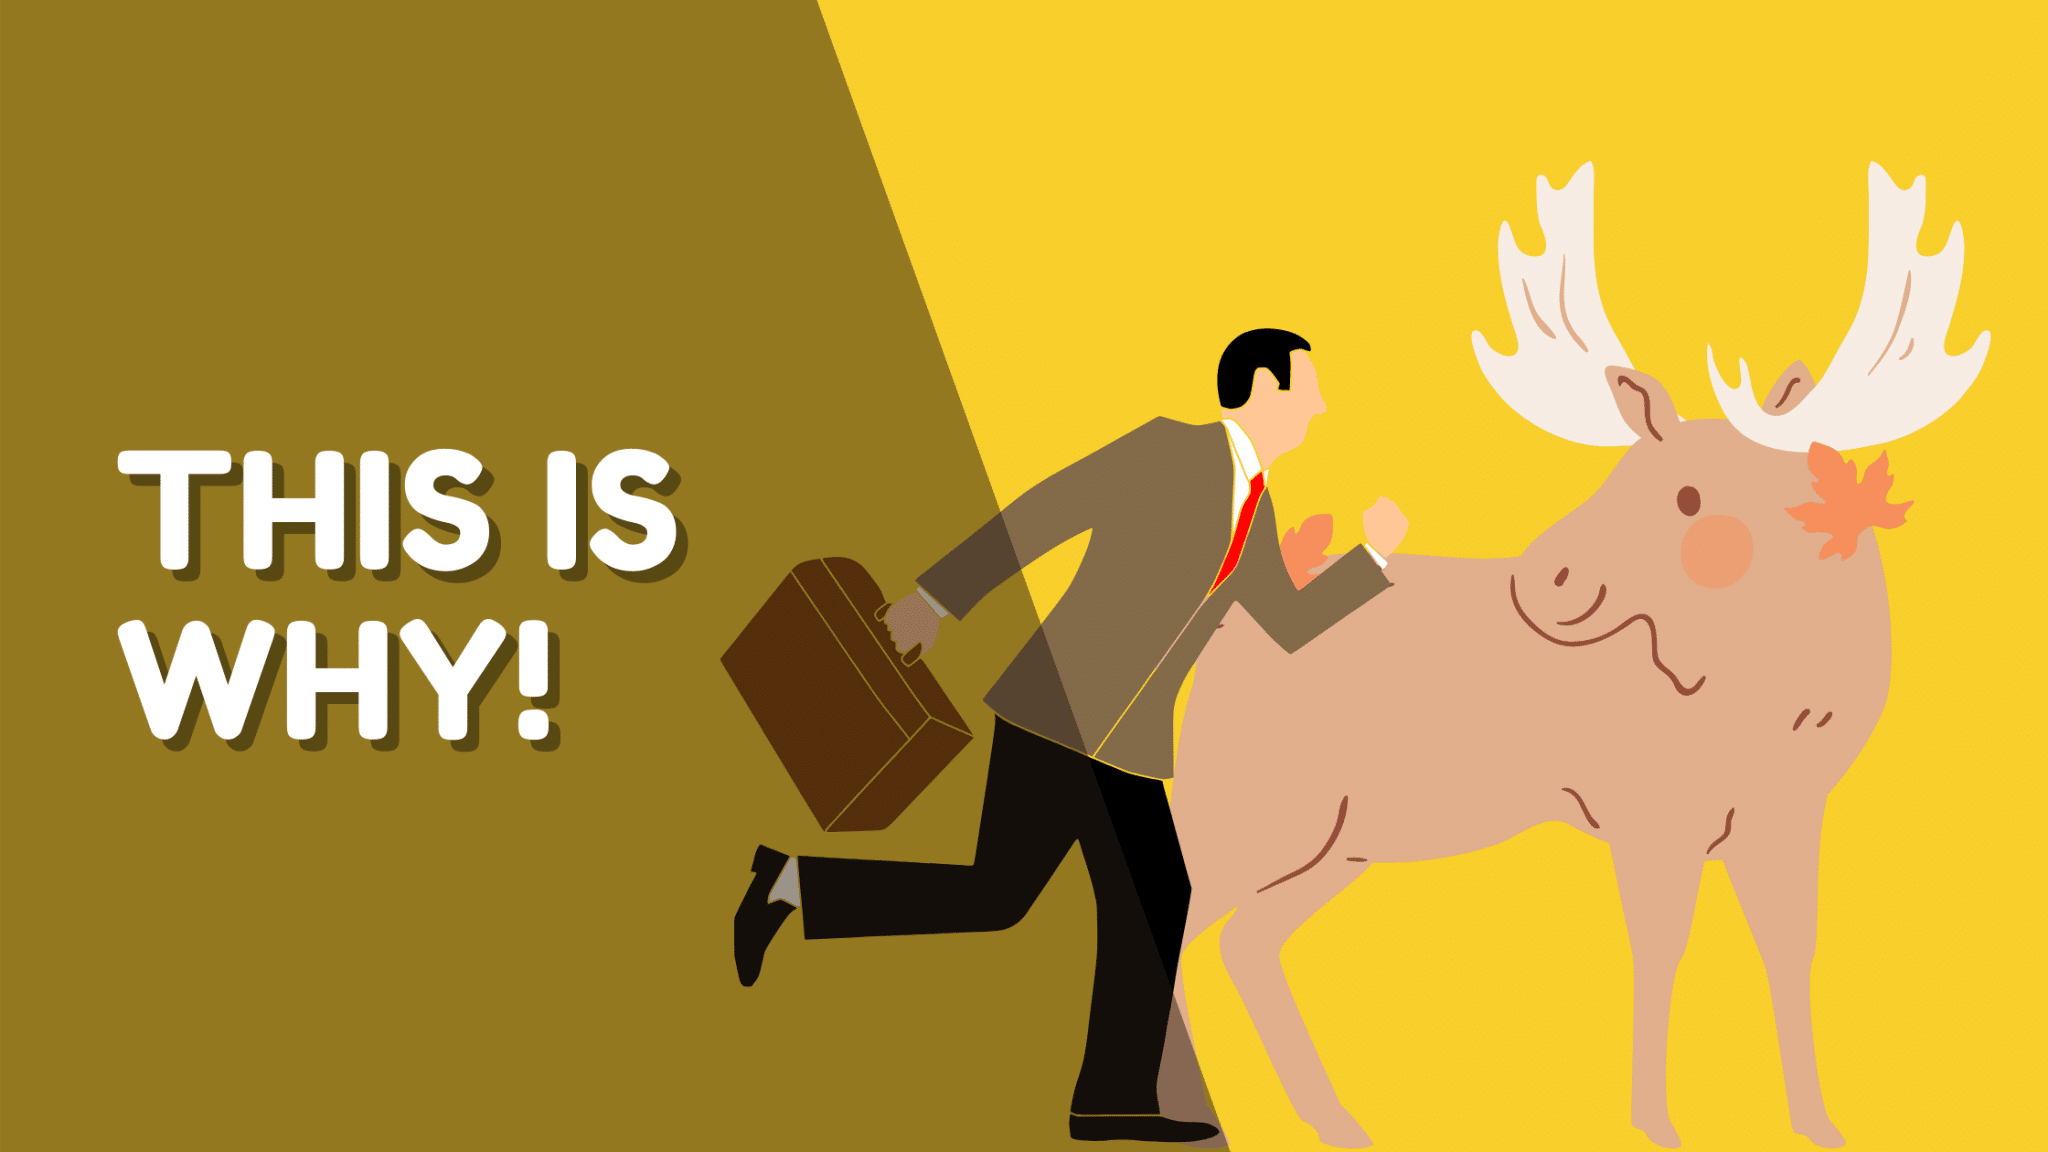 An illustration of a job-seeking man with a briefcase and a deer showcasing resettlement.